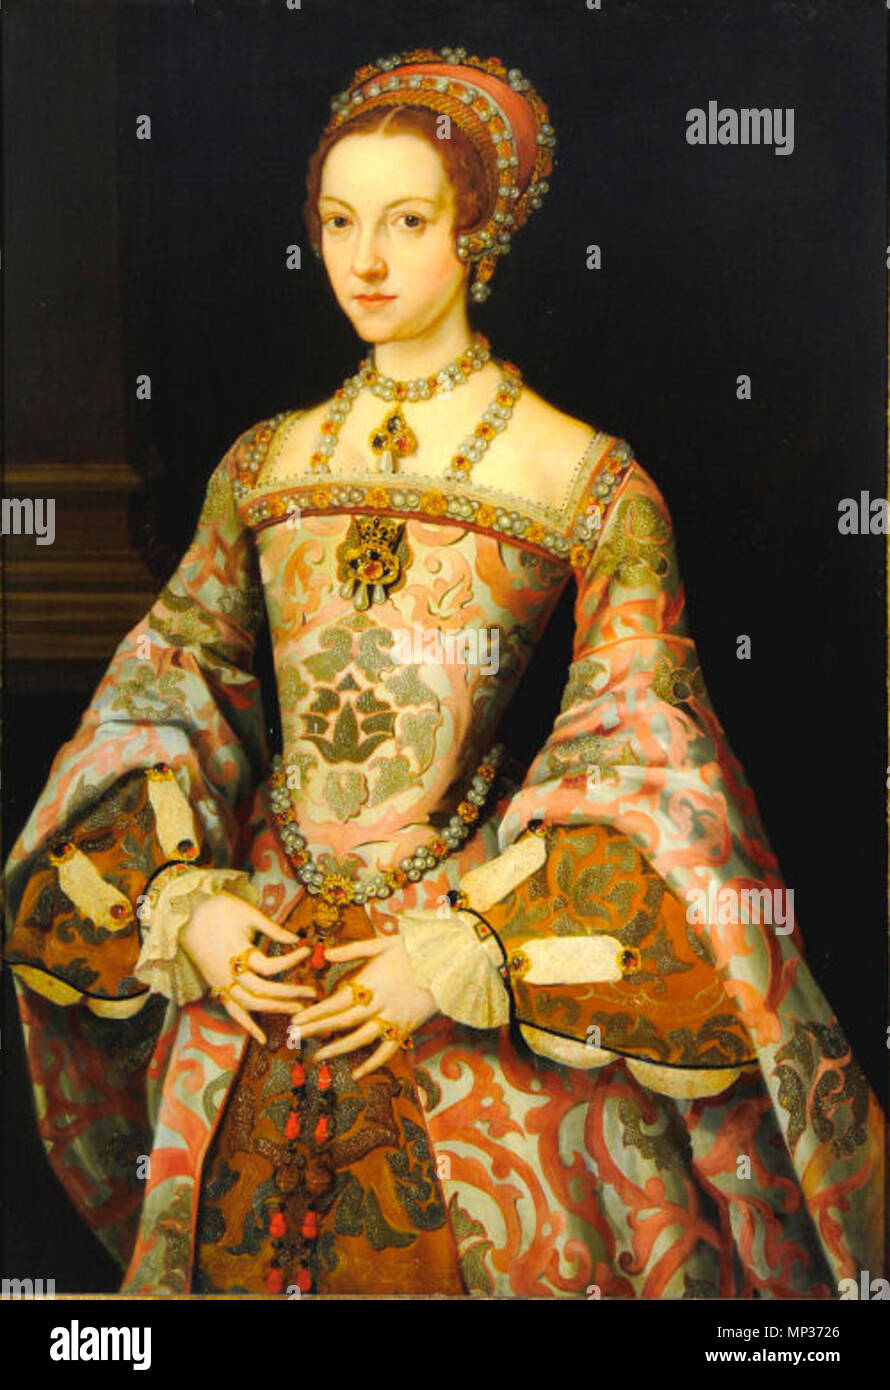 . English: Catherine Parr in the Melton Constable Portrait. Formerly mistaken as Jane Grey. 16th century. Unknown 1035 Queen Catherine Parr Stock Photo